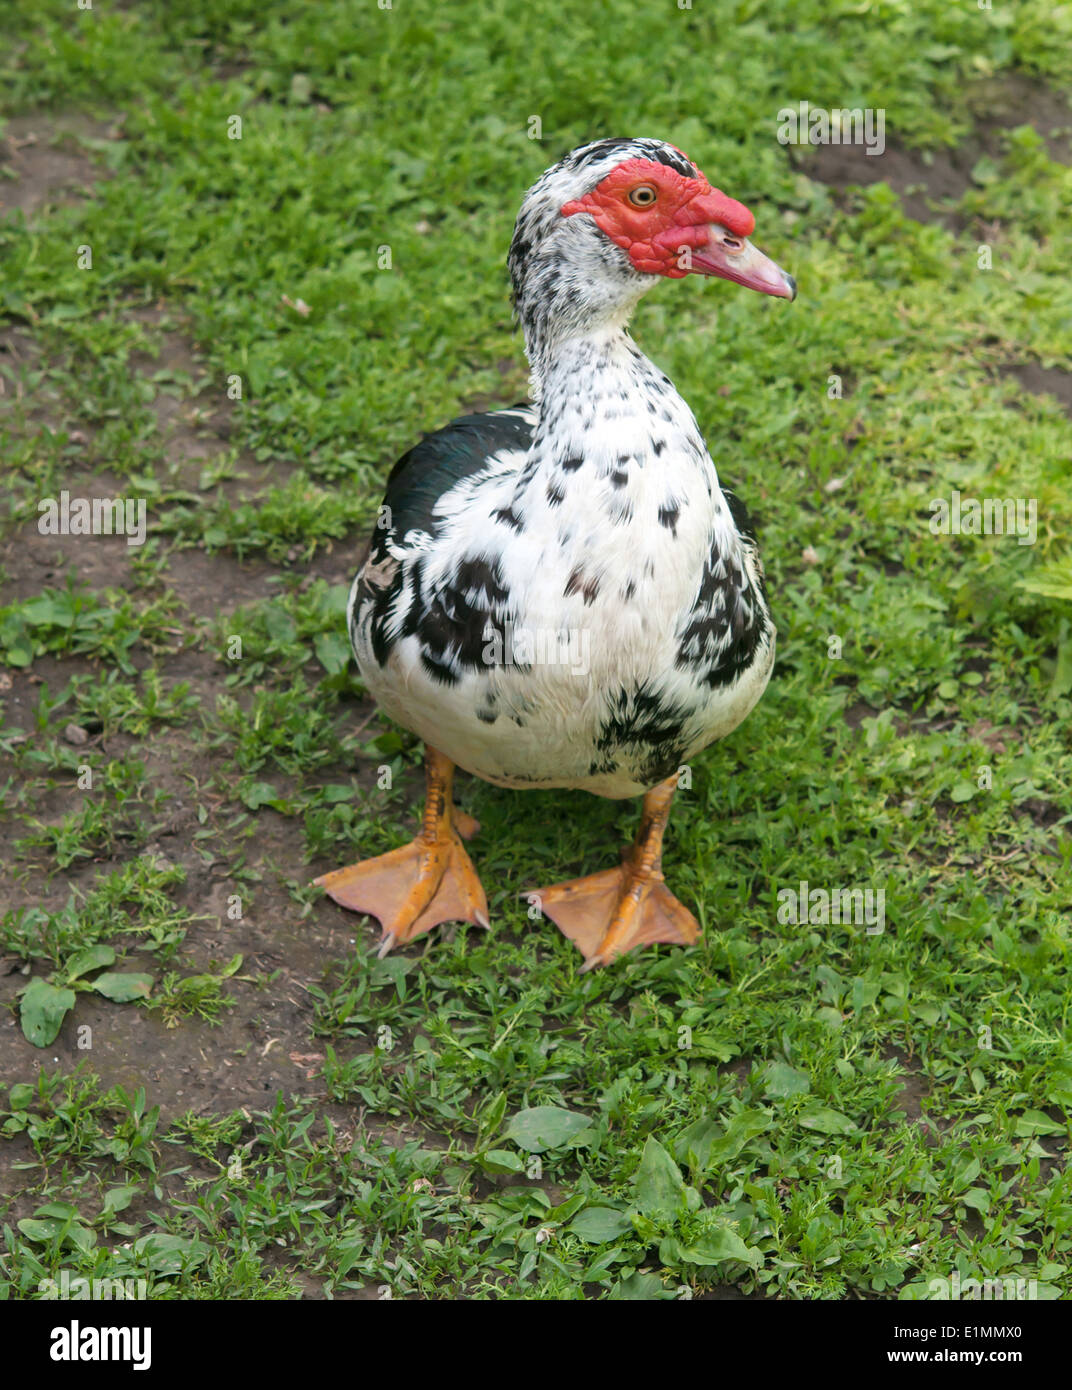 big Muscovy duck close up Stock Photo